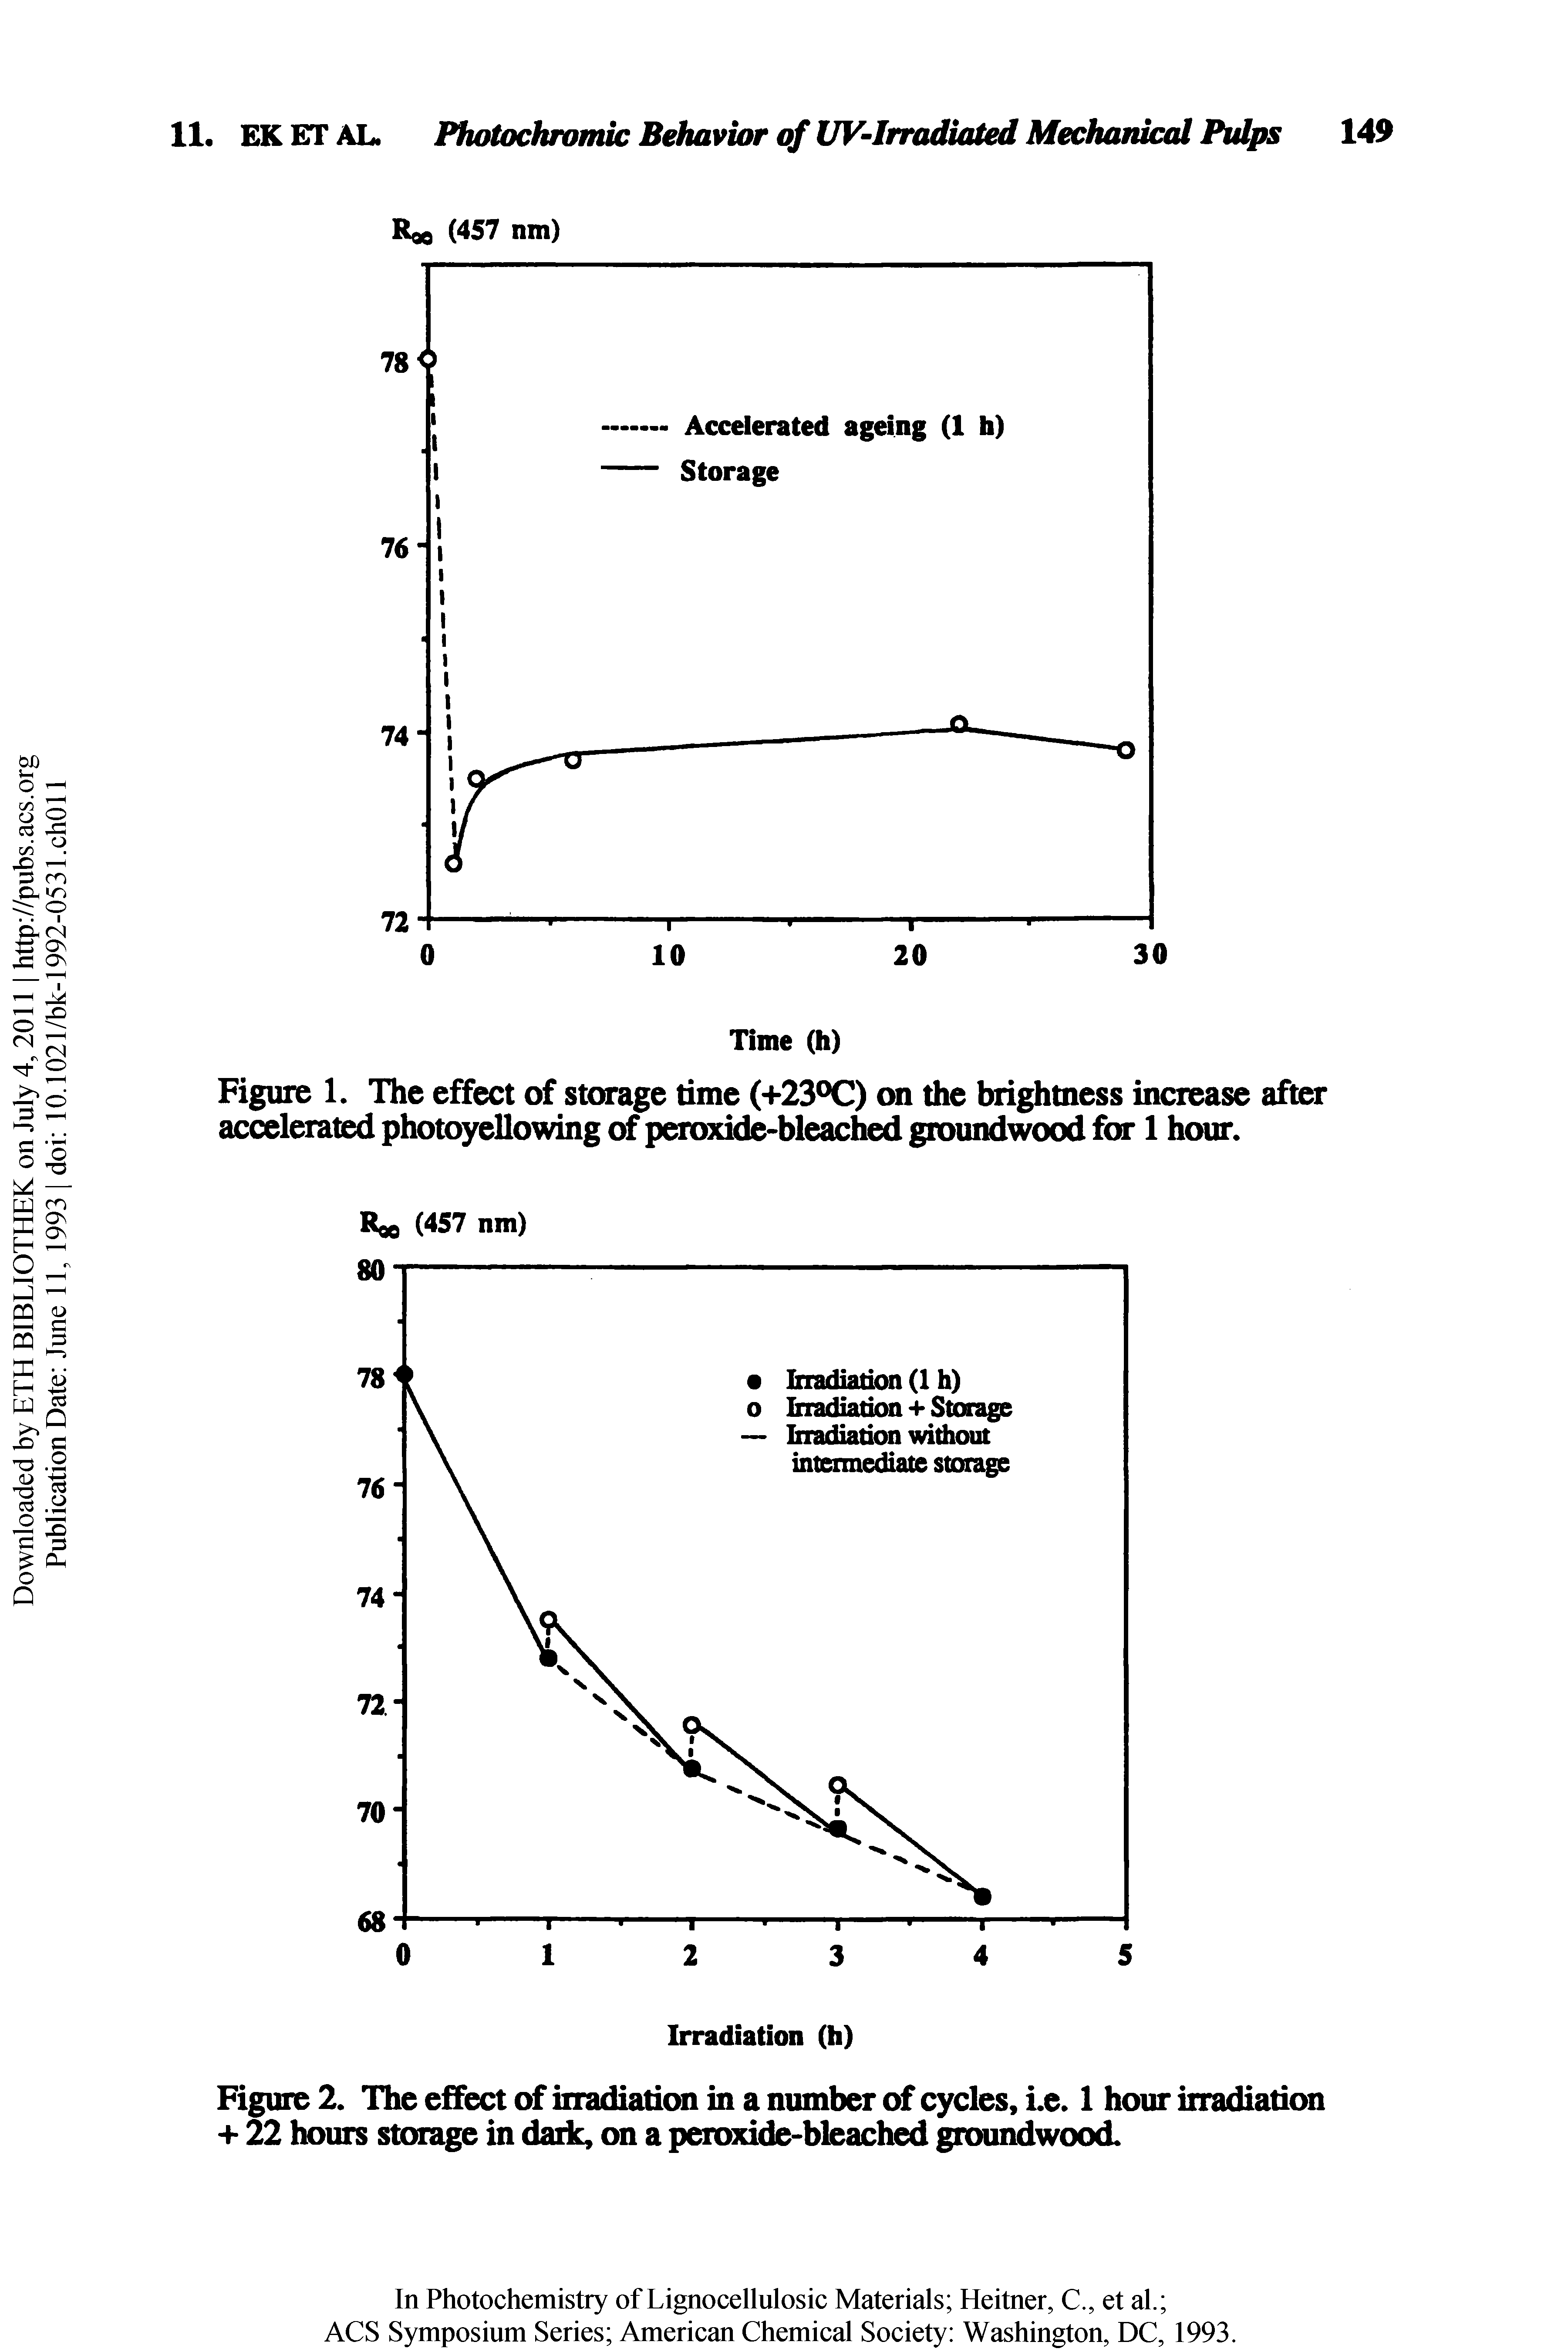 Figure 1. The effect of storage time (+23°C) on the brightness increase after accelerated photoyellowing of peroxide-bleached groundwood for 1 hour.